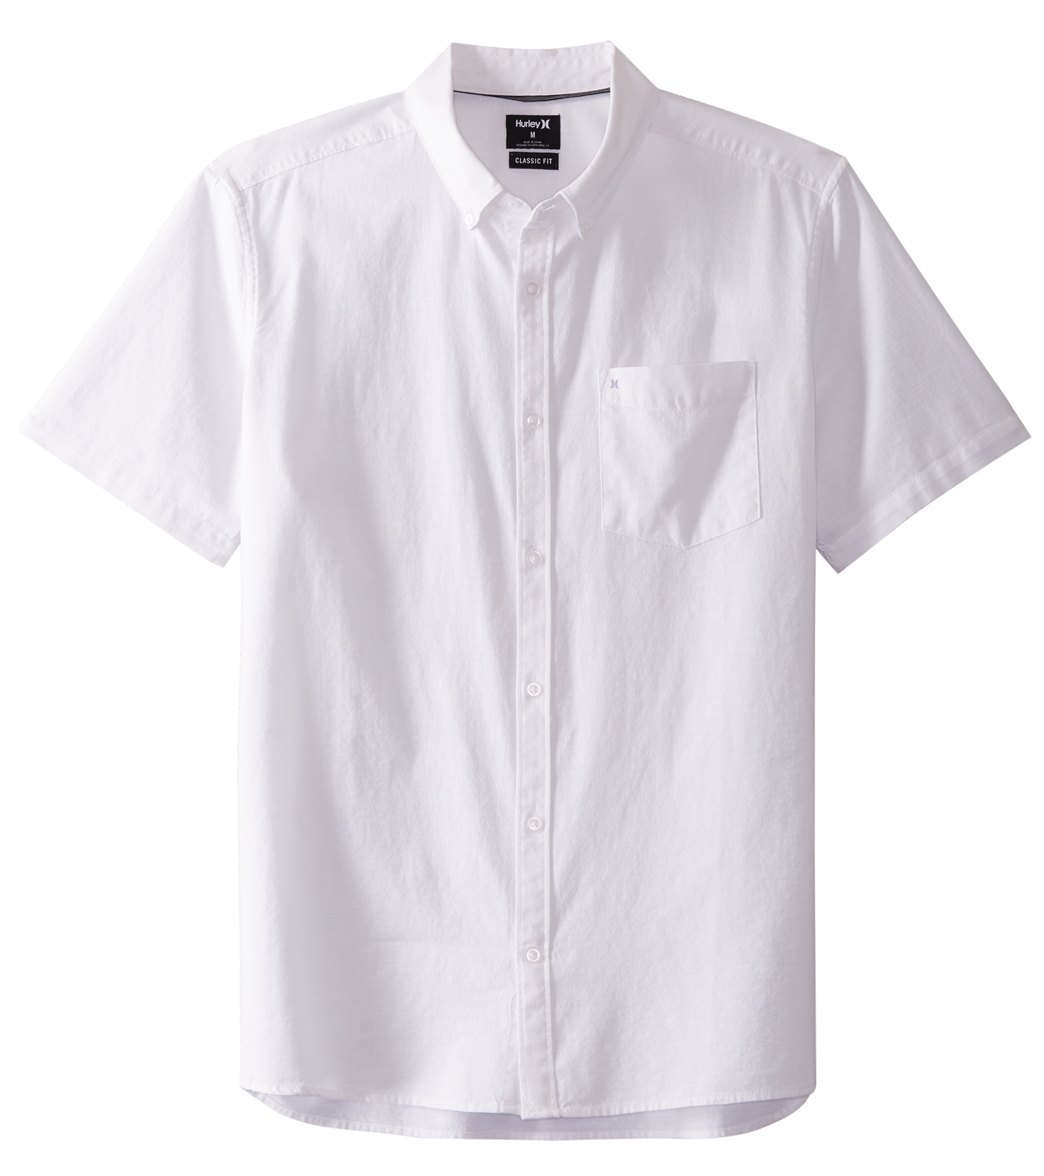 Hurley Men's One & Only 2.0 Short Sleeve Woven Shirt - White Small Cotton - Swimoutlet.com